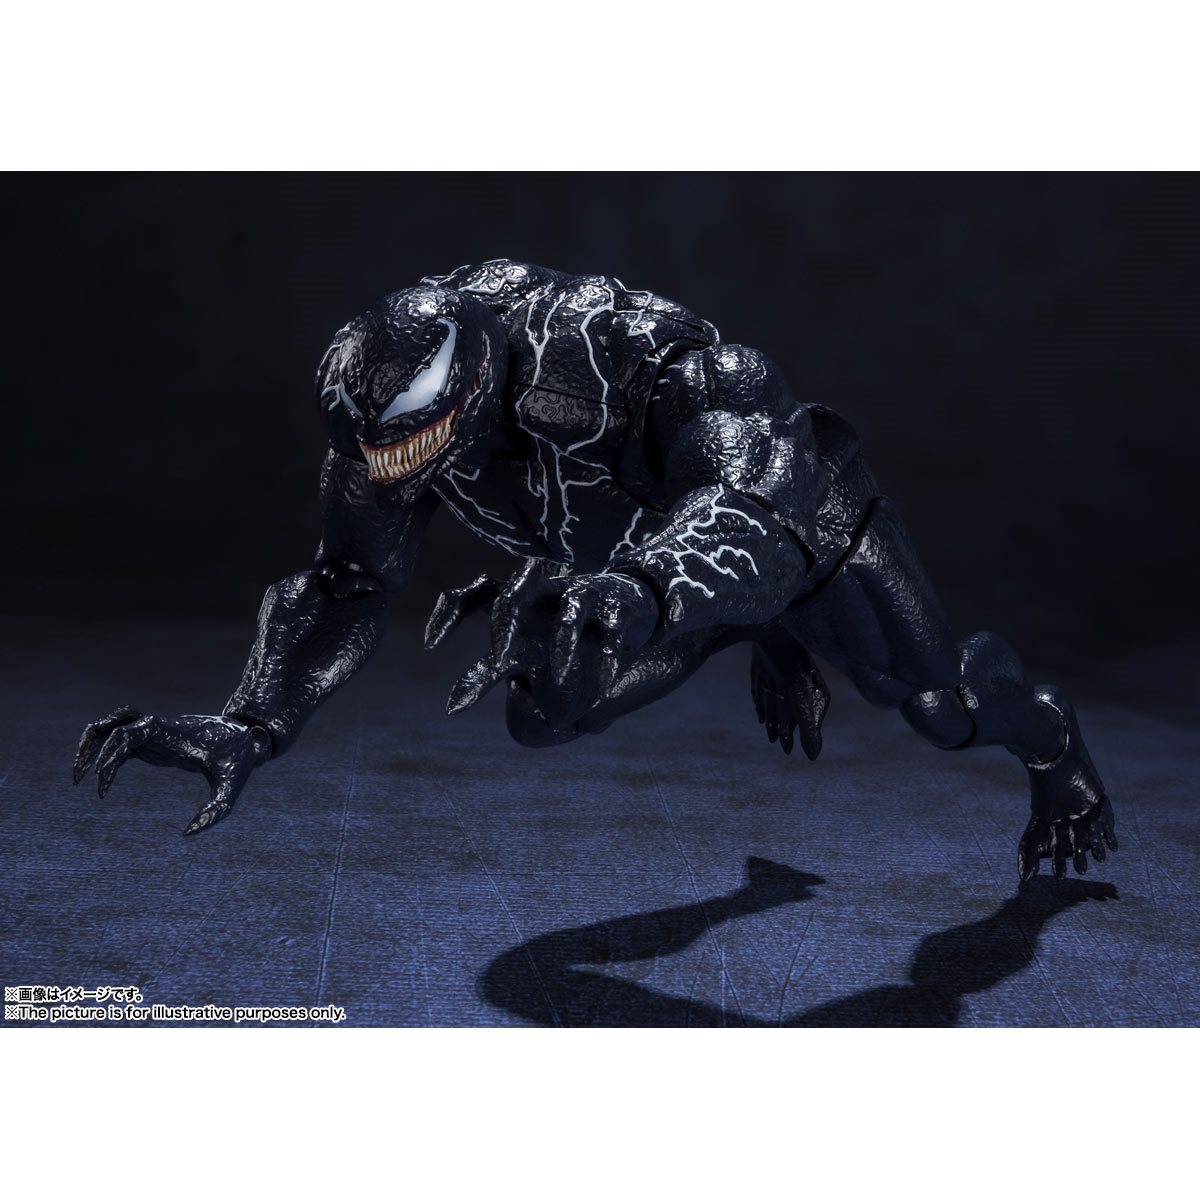 VENOM - Venom 2 Let There Be Carnage Action figure / New toy